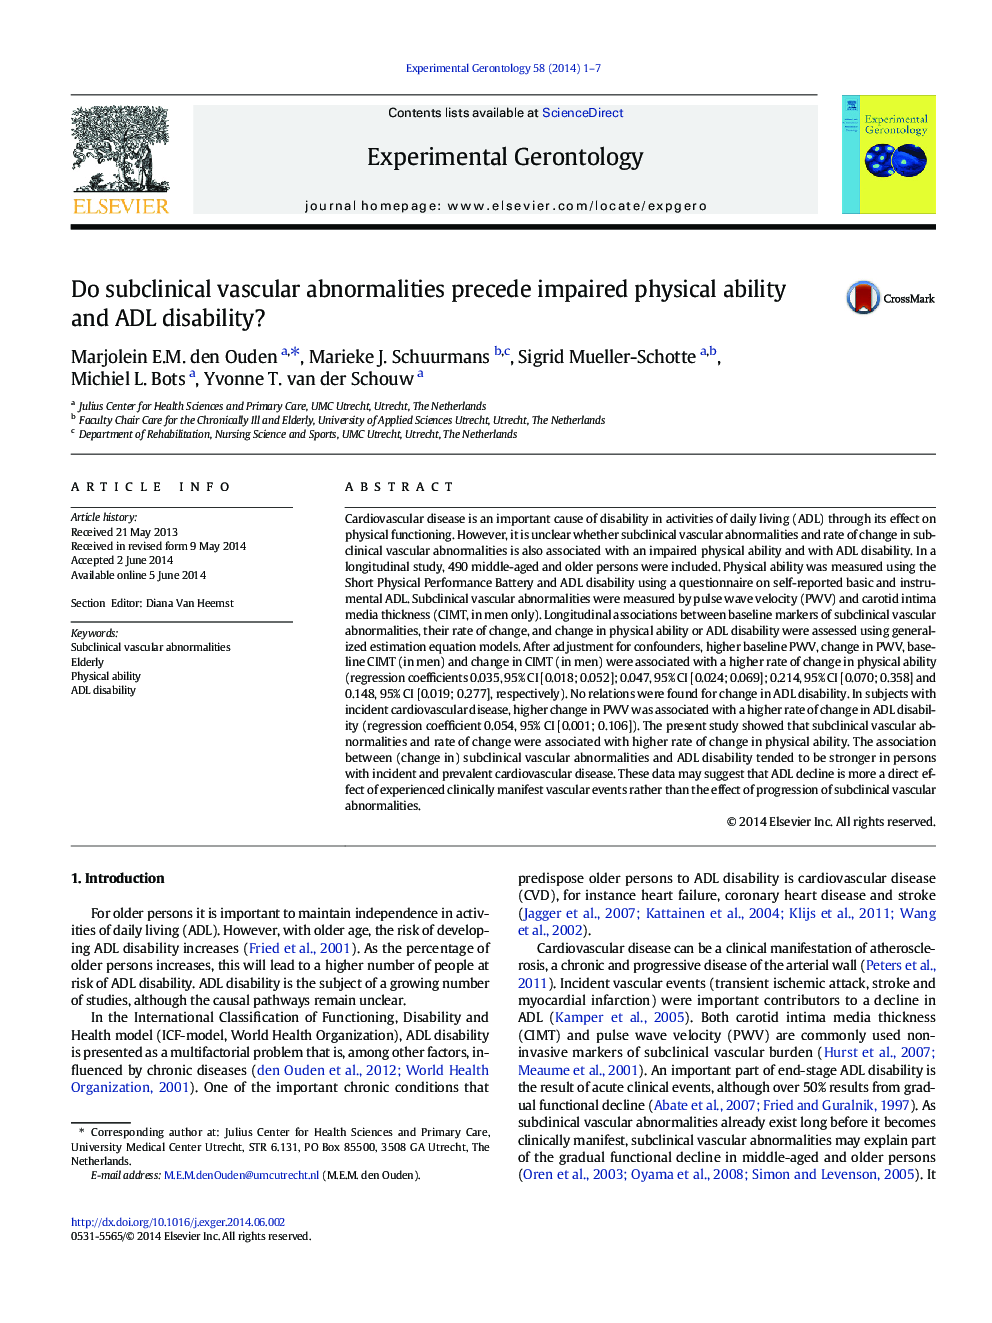 Do subclinical vascular abnormalities precede impaired physical ability and ADL disability?